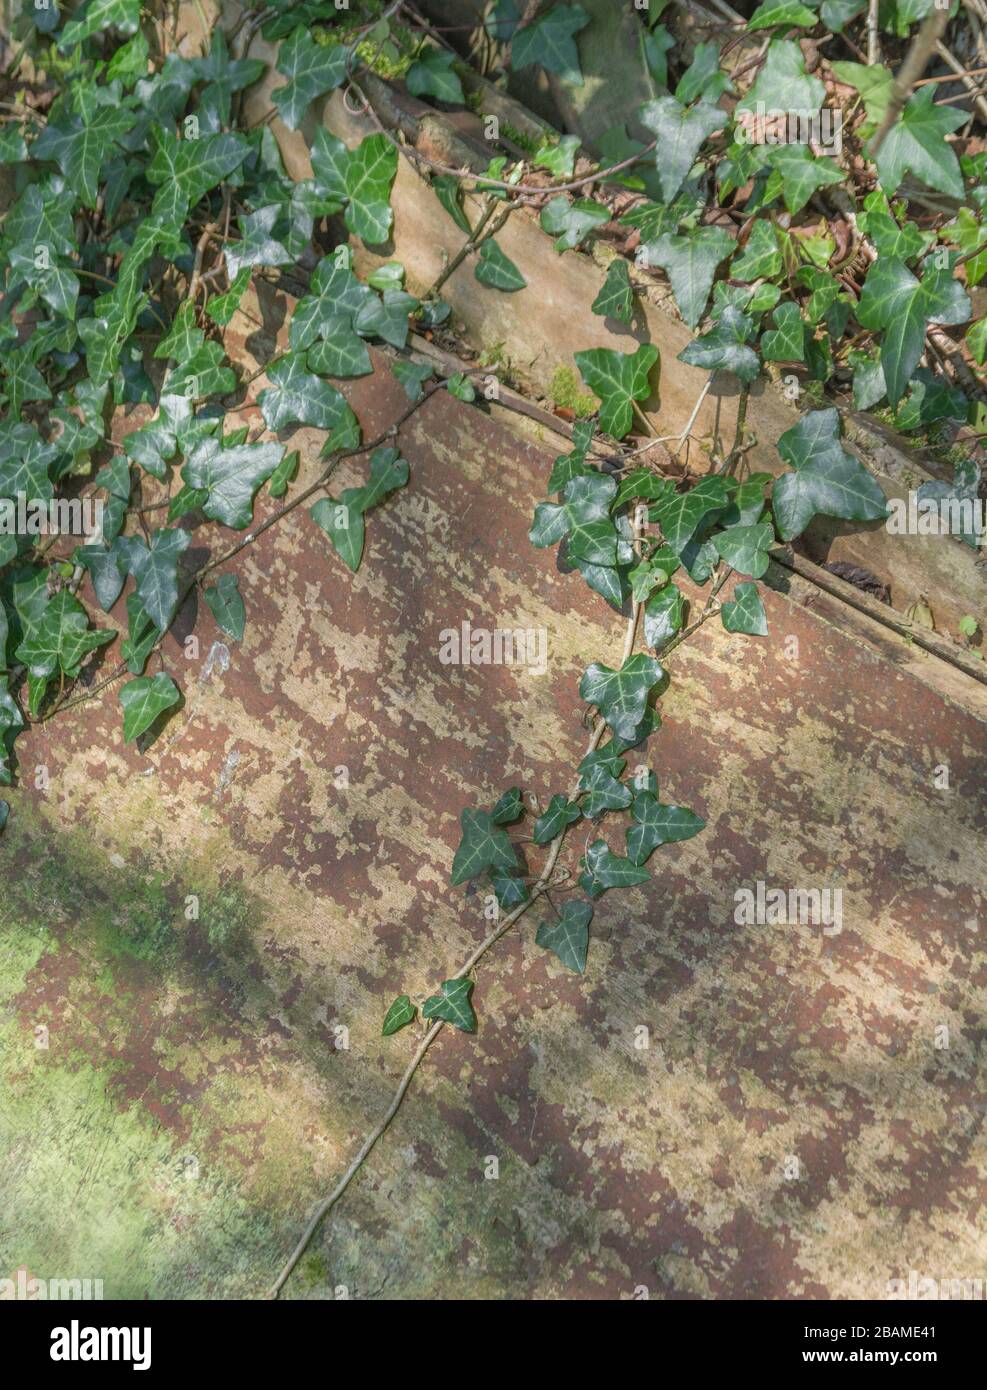 Climbing ivy - Common Ivy / Hedera helix growing on the side of a wooden shed wall. Concept creeping ivy, medicinal plant once used in herbal medicine Stock Photo